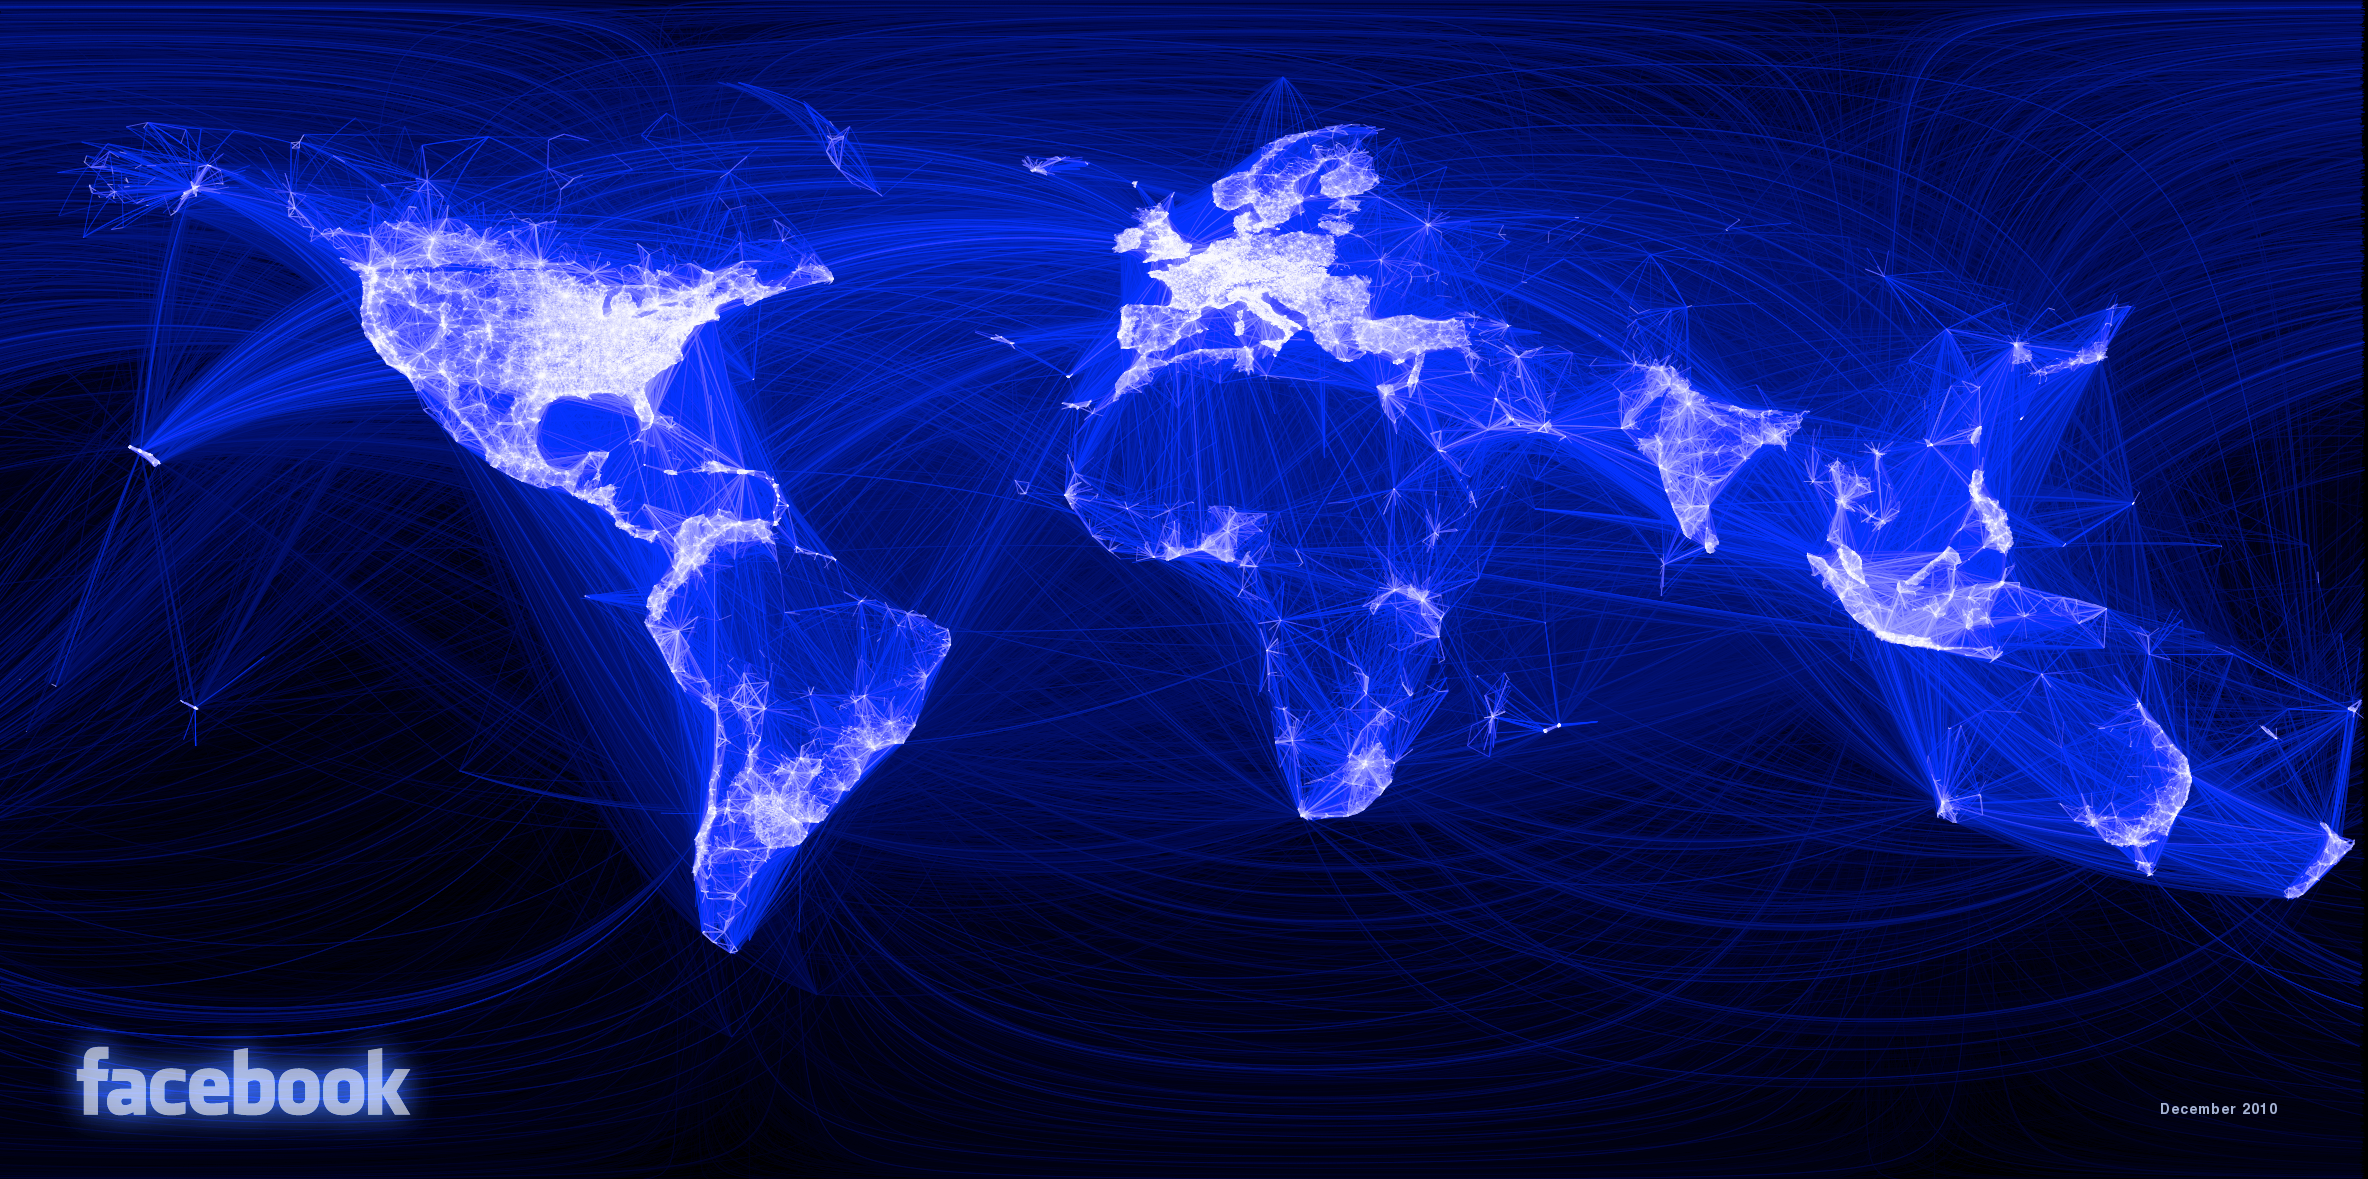 General 2368x1179 world map Facebook connectivity social media simple background minimalism